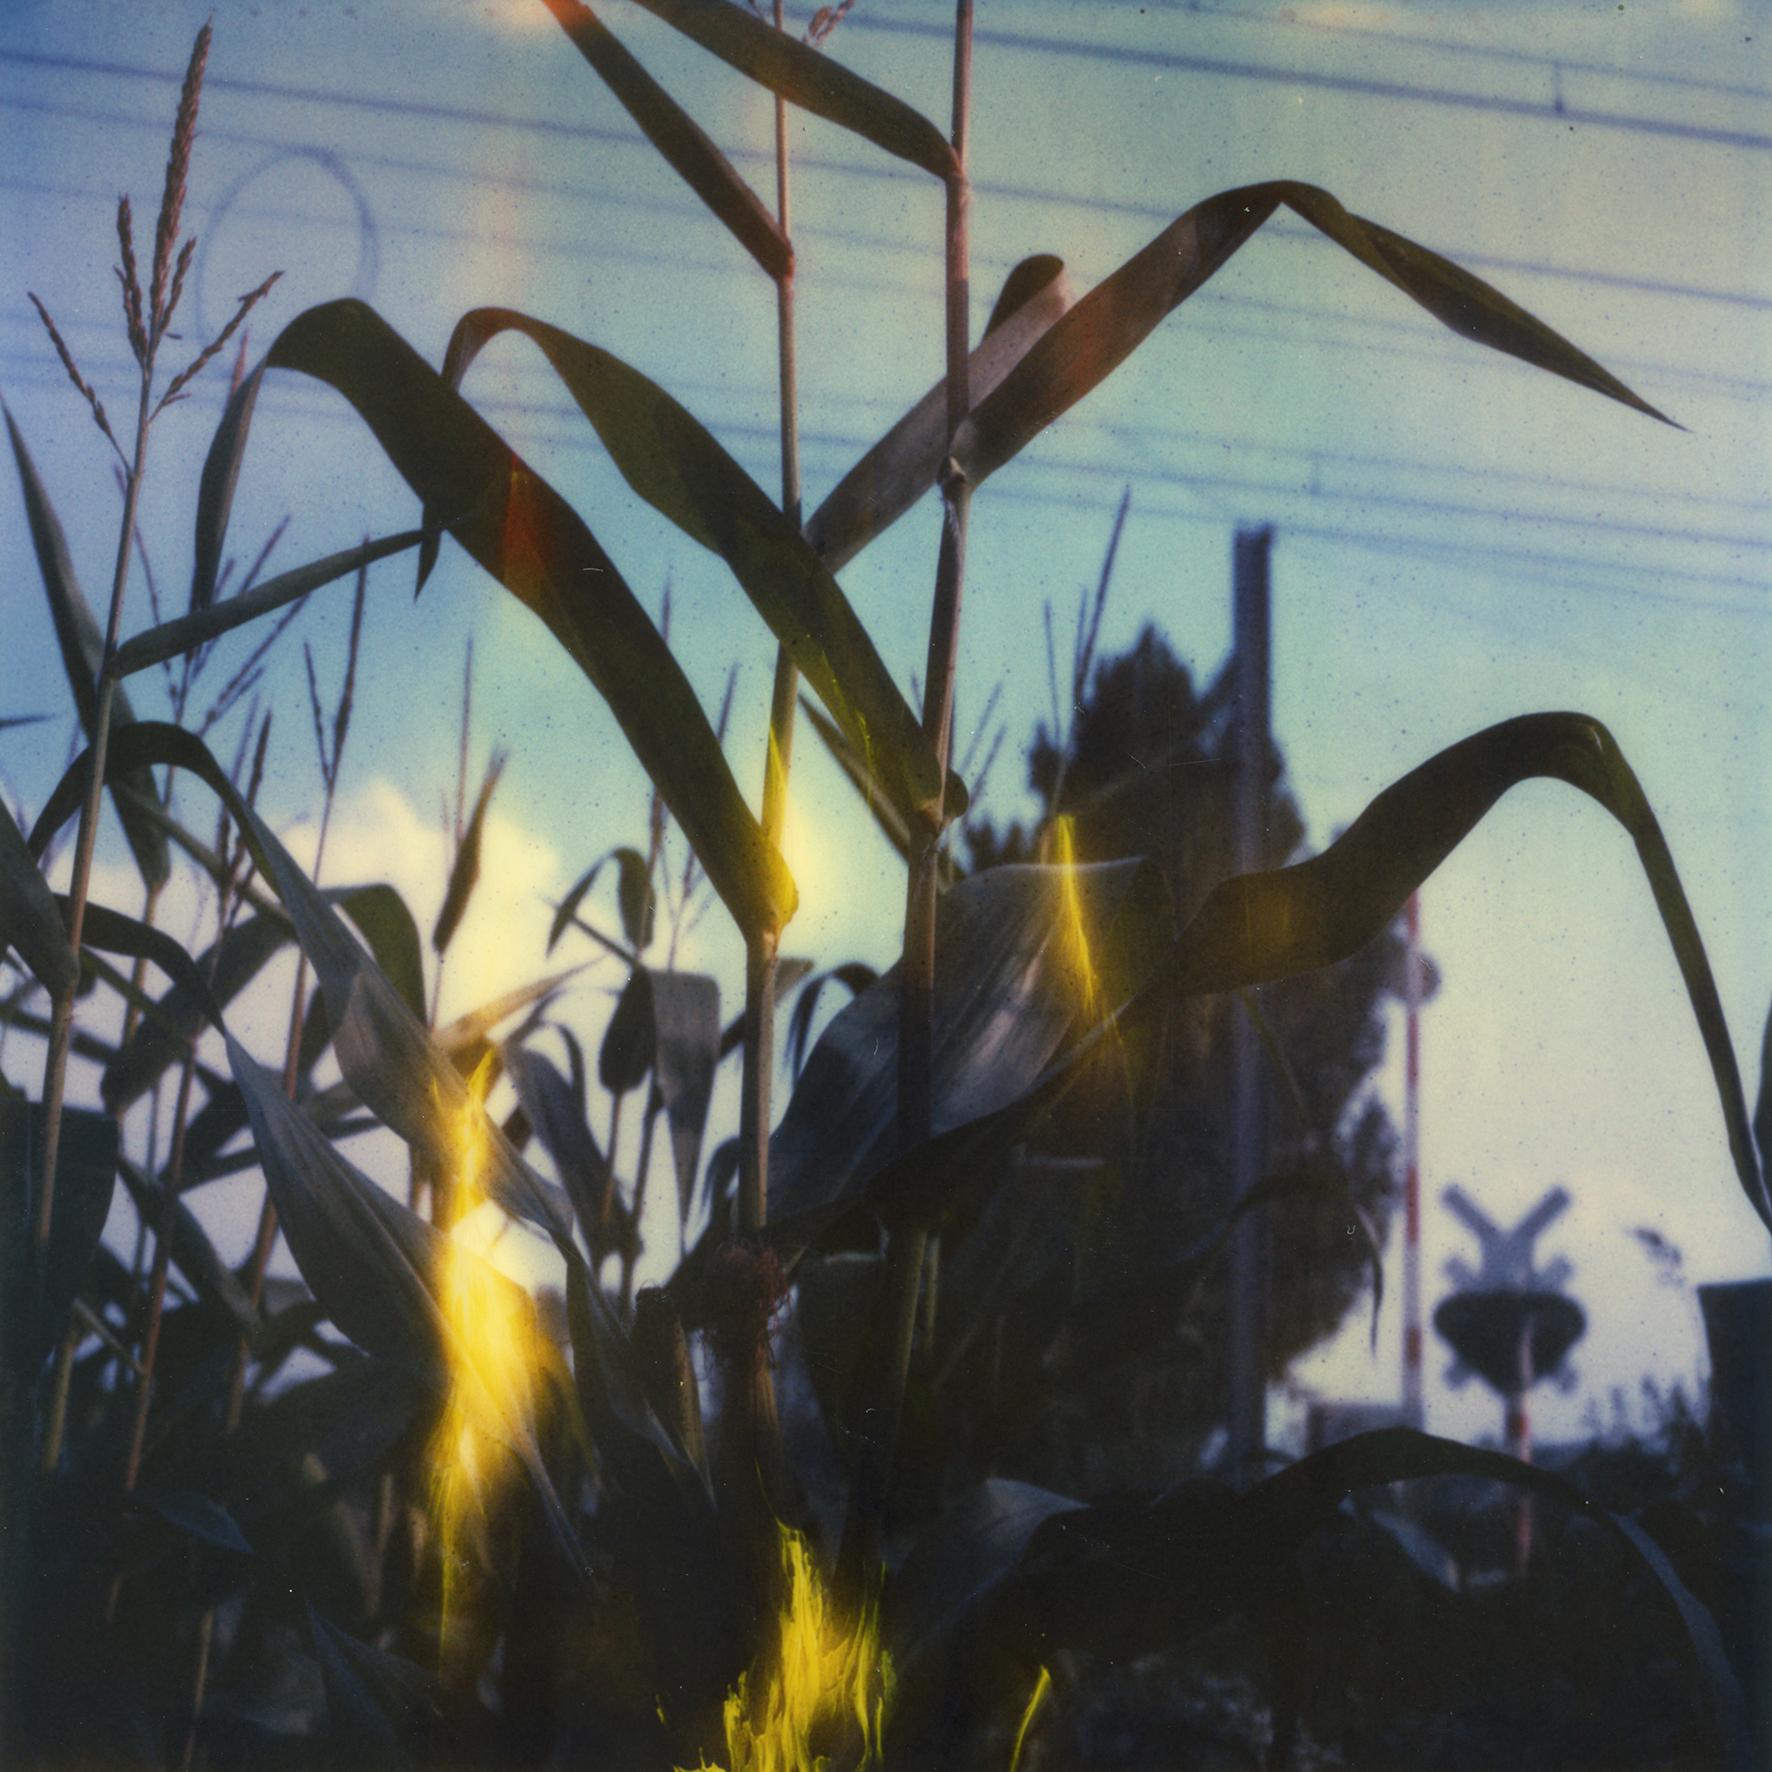 The Cornfield - Scene One, 2007/2018, Edition 1/3 plus 1 Artist Proof, 
16 pieces each 30x30cm, installed with gaps 135x135cm. Digital color prints based on 16 original Polaroids, mounted on dilite 2mm - with matte UV-Protection, Alu profiles on the